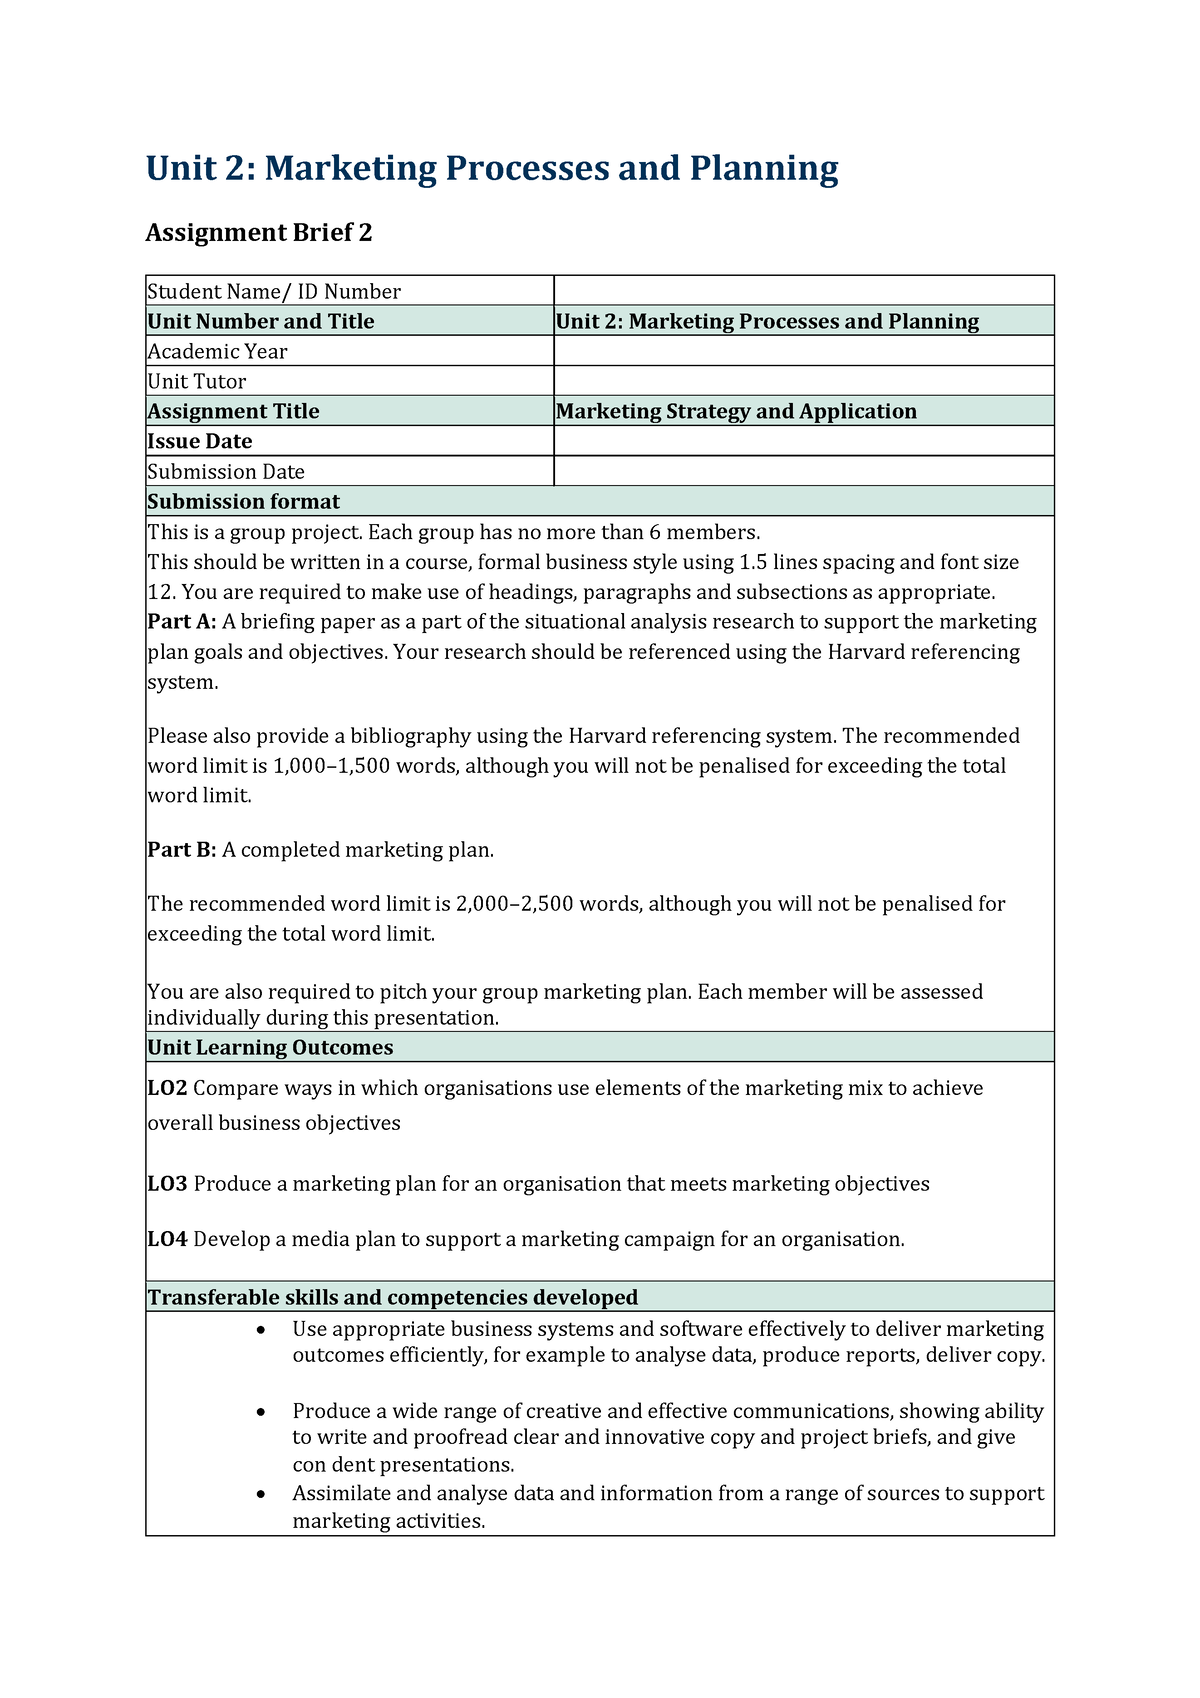 marketing processes and planning assignment